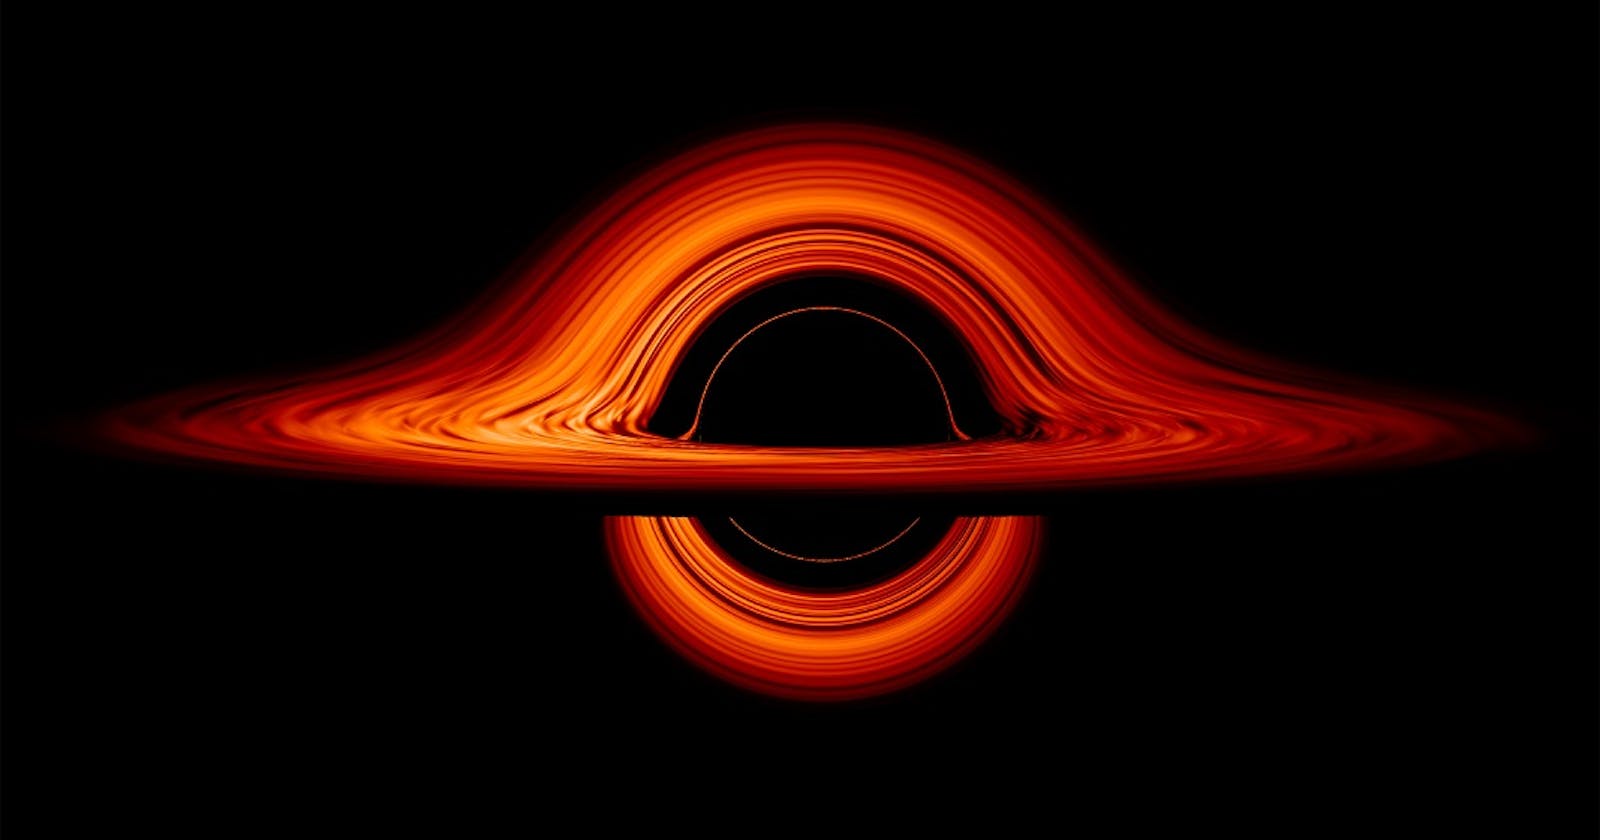 How Black hole forms?